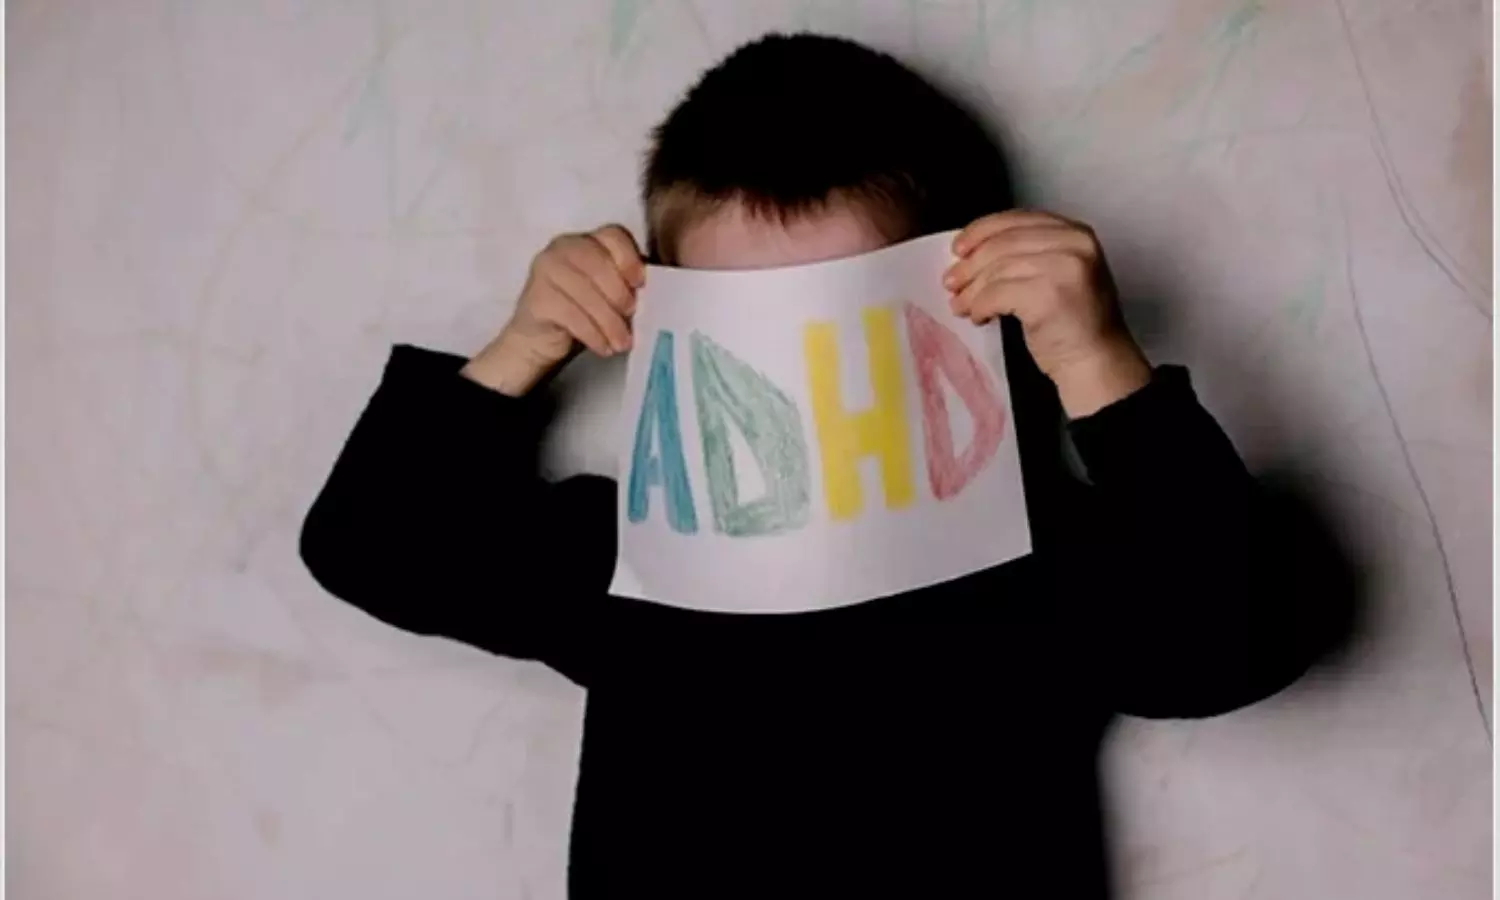 Brain changes on MRI may distinguish children with ADHD from those without it